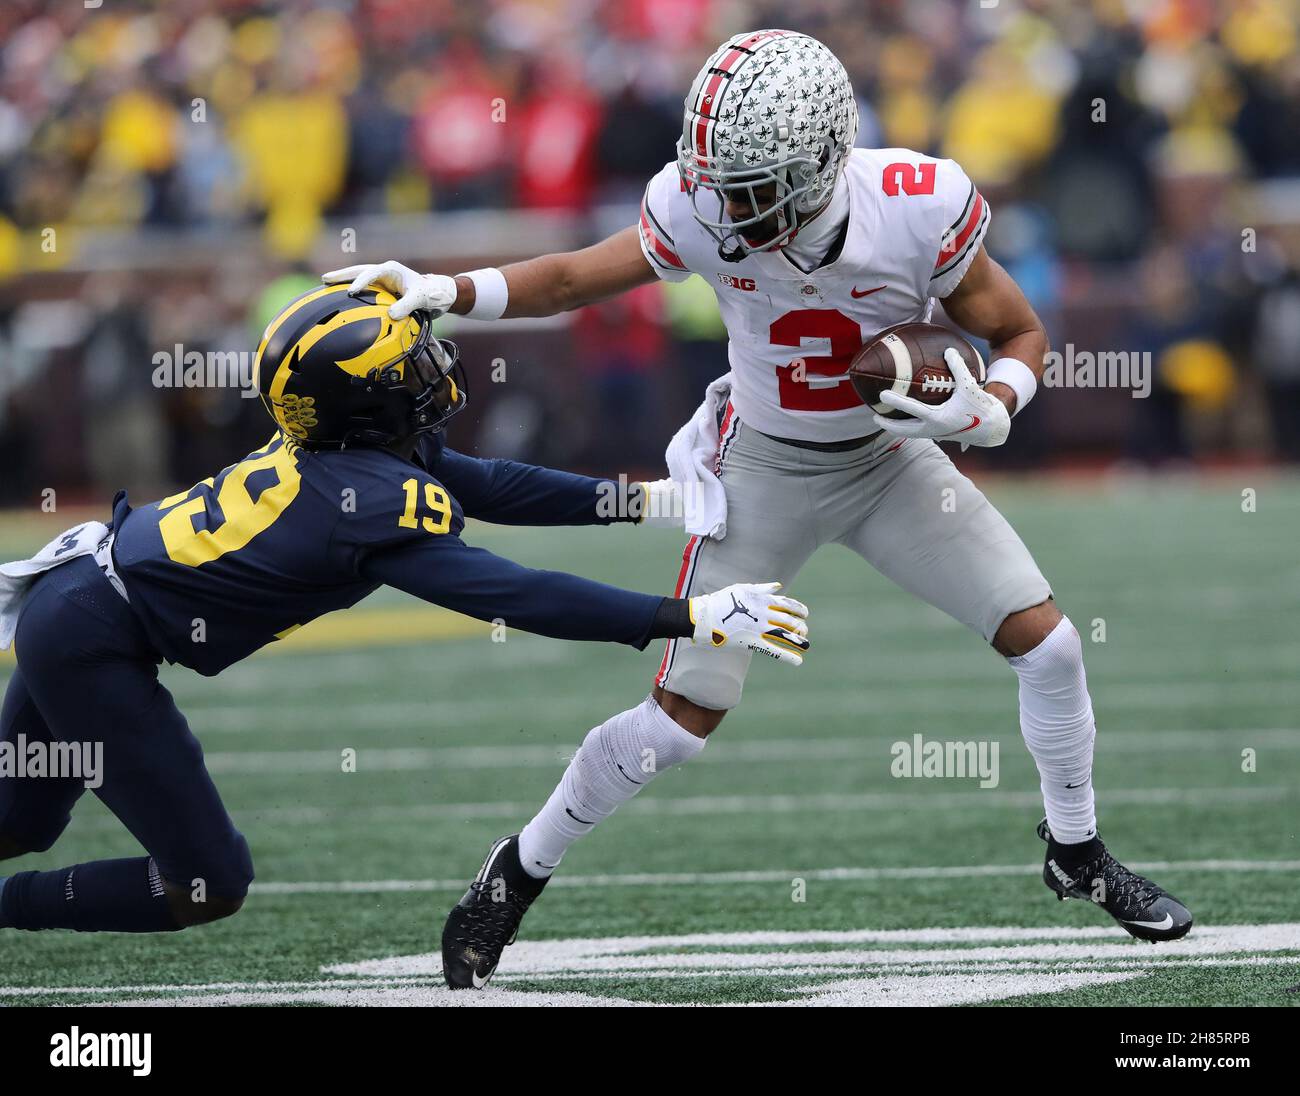 Ann Arbor, United States. 27th Nov, 2021. Ohio State Buckeyes Chris Olave (2) stiff arms Michigan Wolverines Rod Moore (19) on a run after a catch in Ann Arbor, Michigan on Saturday, November 27, 2021. Photo by Aaron Josefczyk/UPI Credit: UPI/Alamy Live News Stock Photo